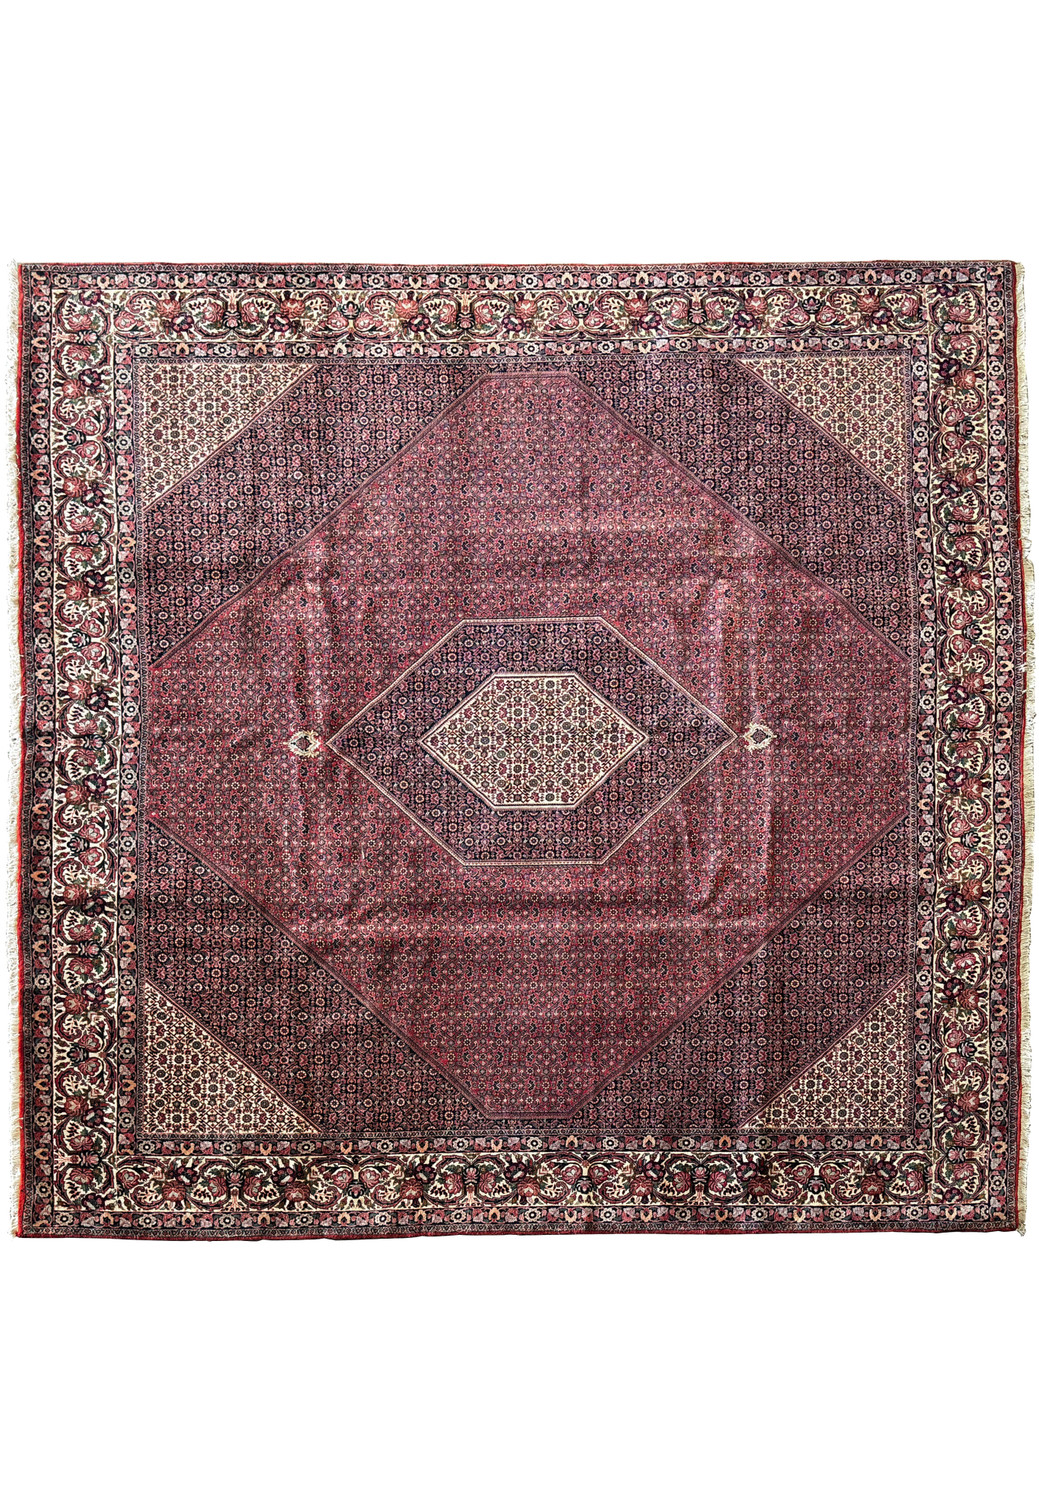 An expansive Persian Bijar square rug measuring 11'6x11'6, displaying a rich burgundy field with a large, central diamond medallion and intricately detailed geometric patterns.